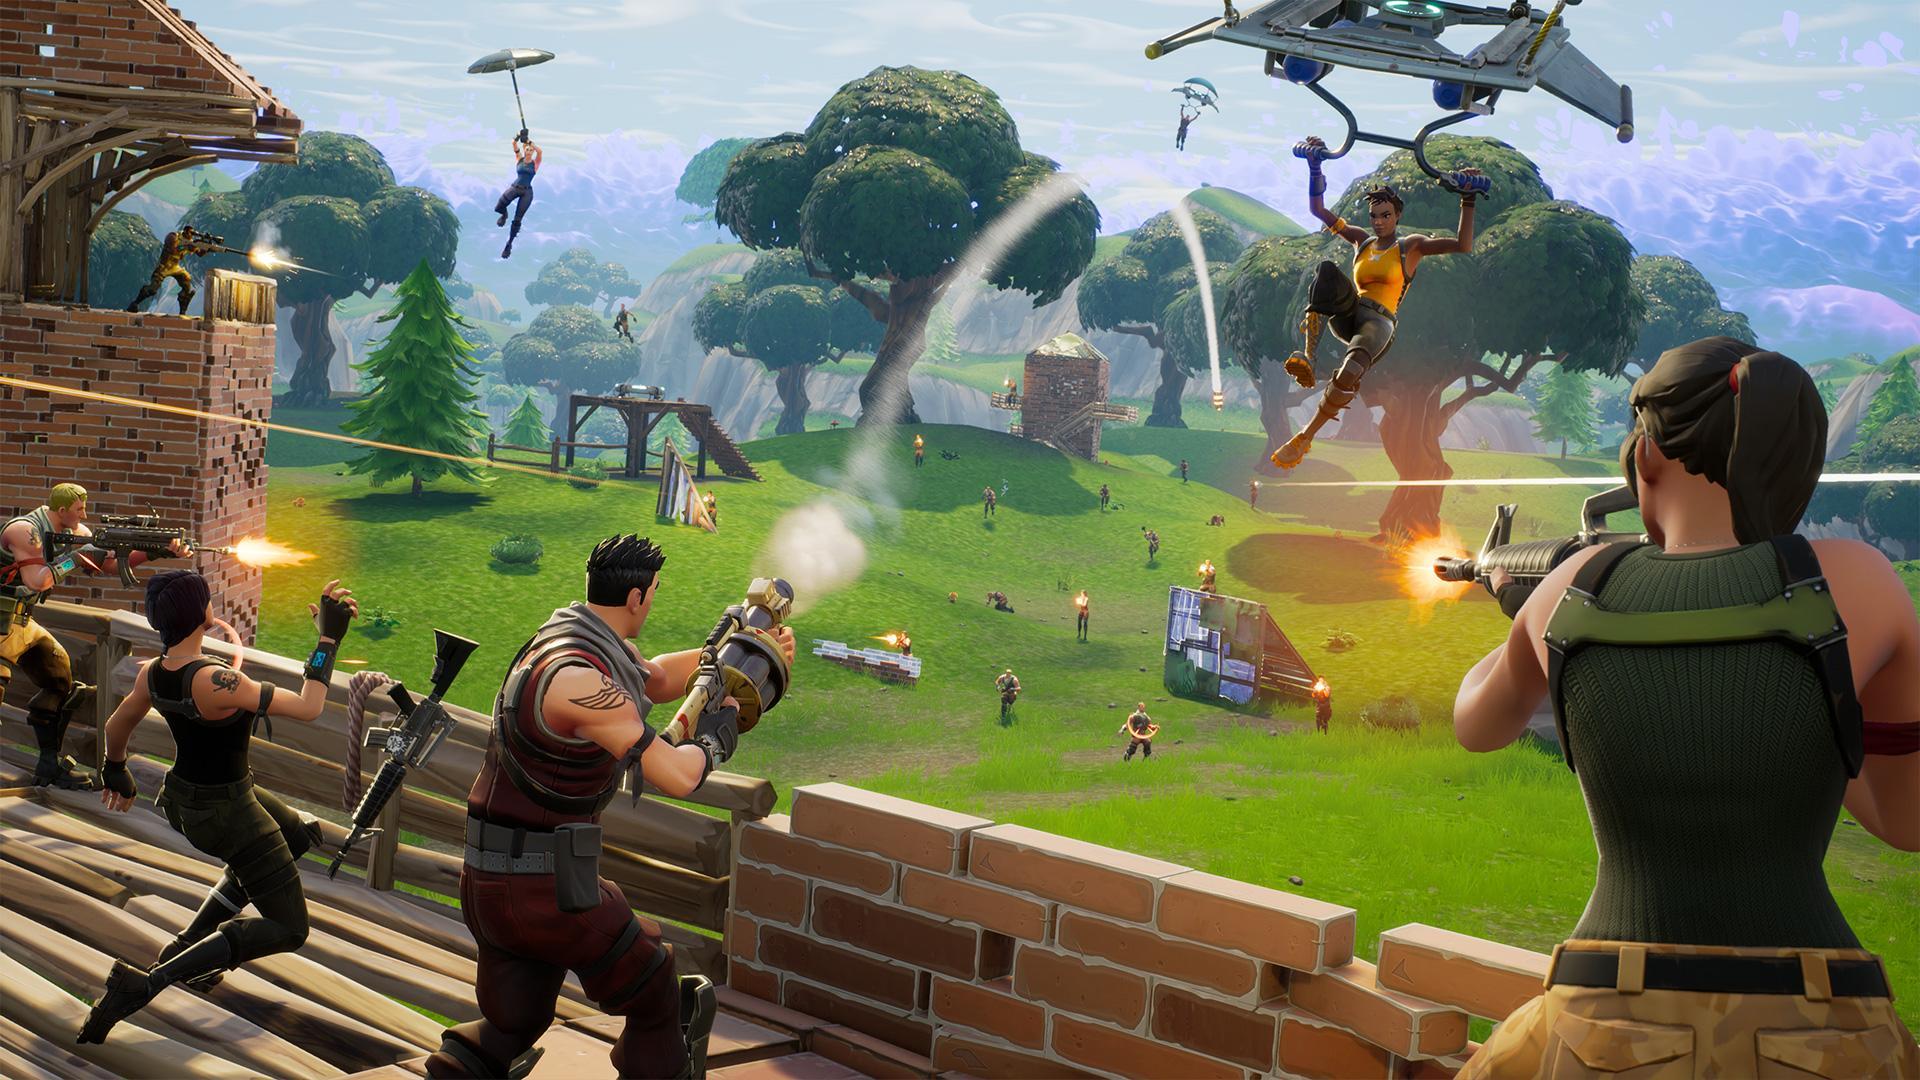 Sick of getting schooled in Fortnite? Here's what happened when we